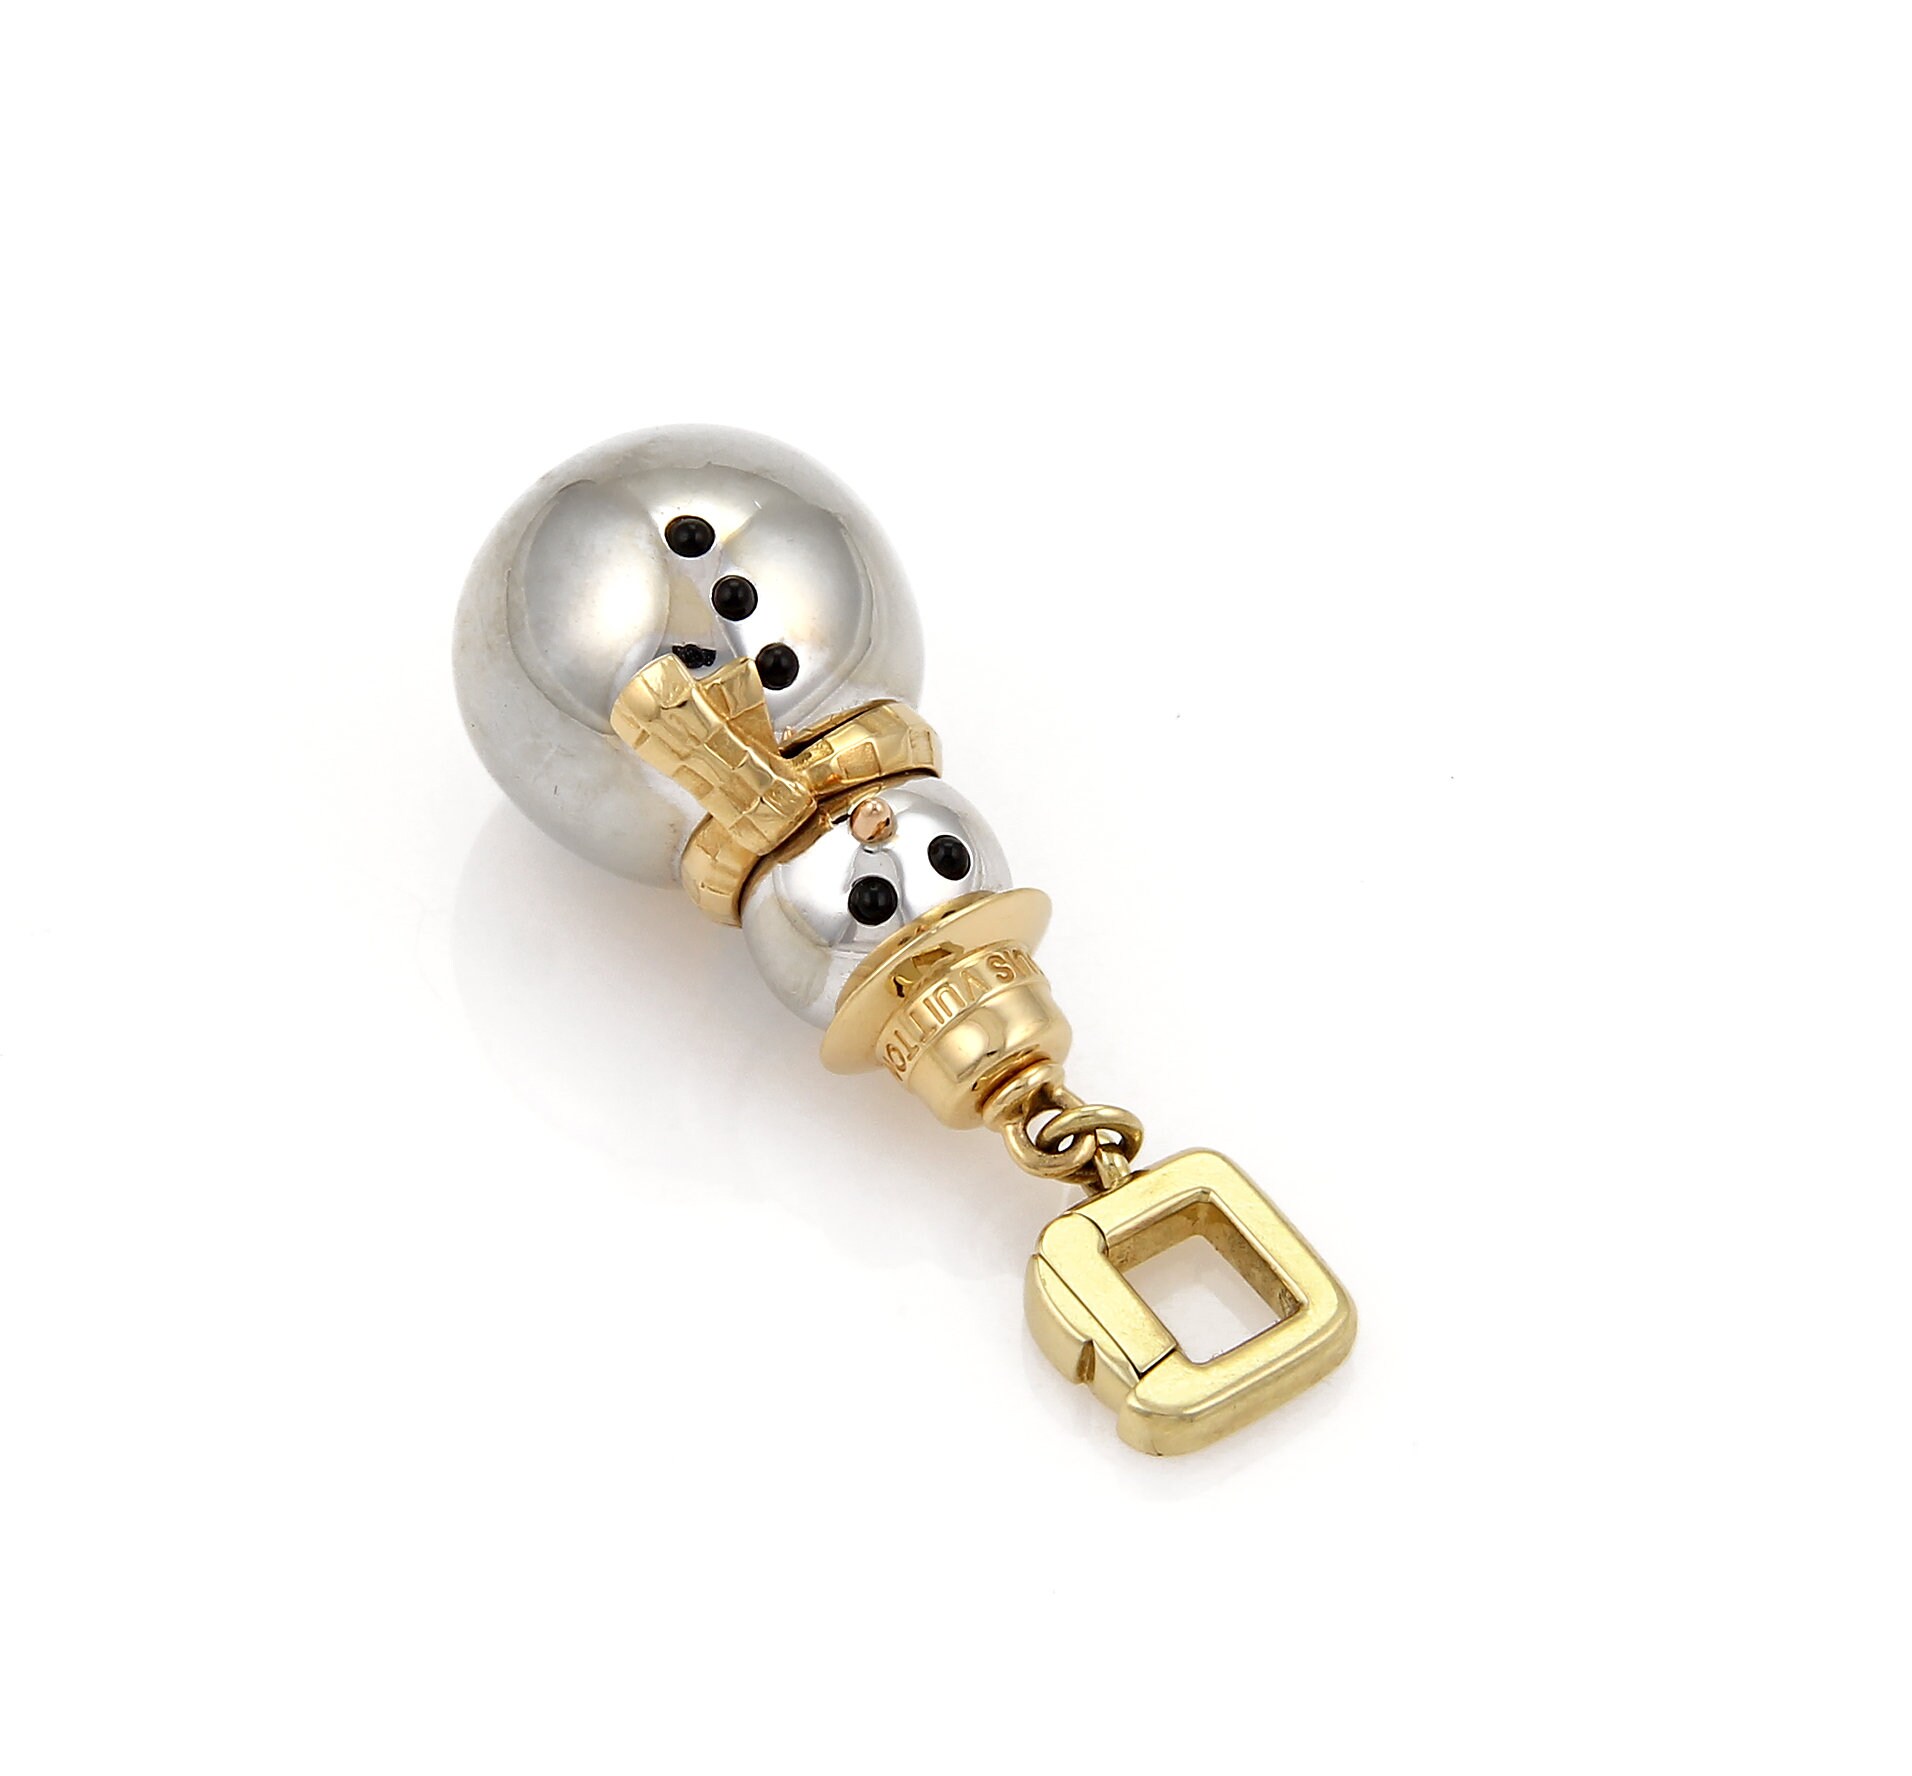 Buy 21705 Louis Vuitton Snowman Onyx 18k Two Tone Gold Charm Online in  India 